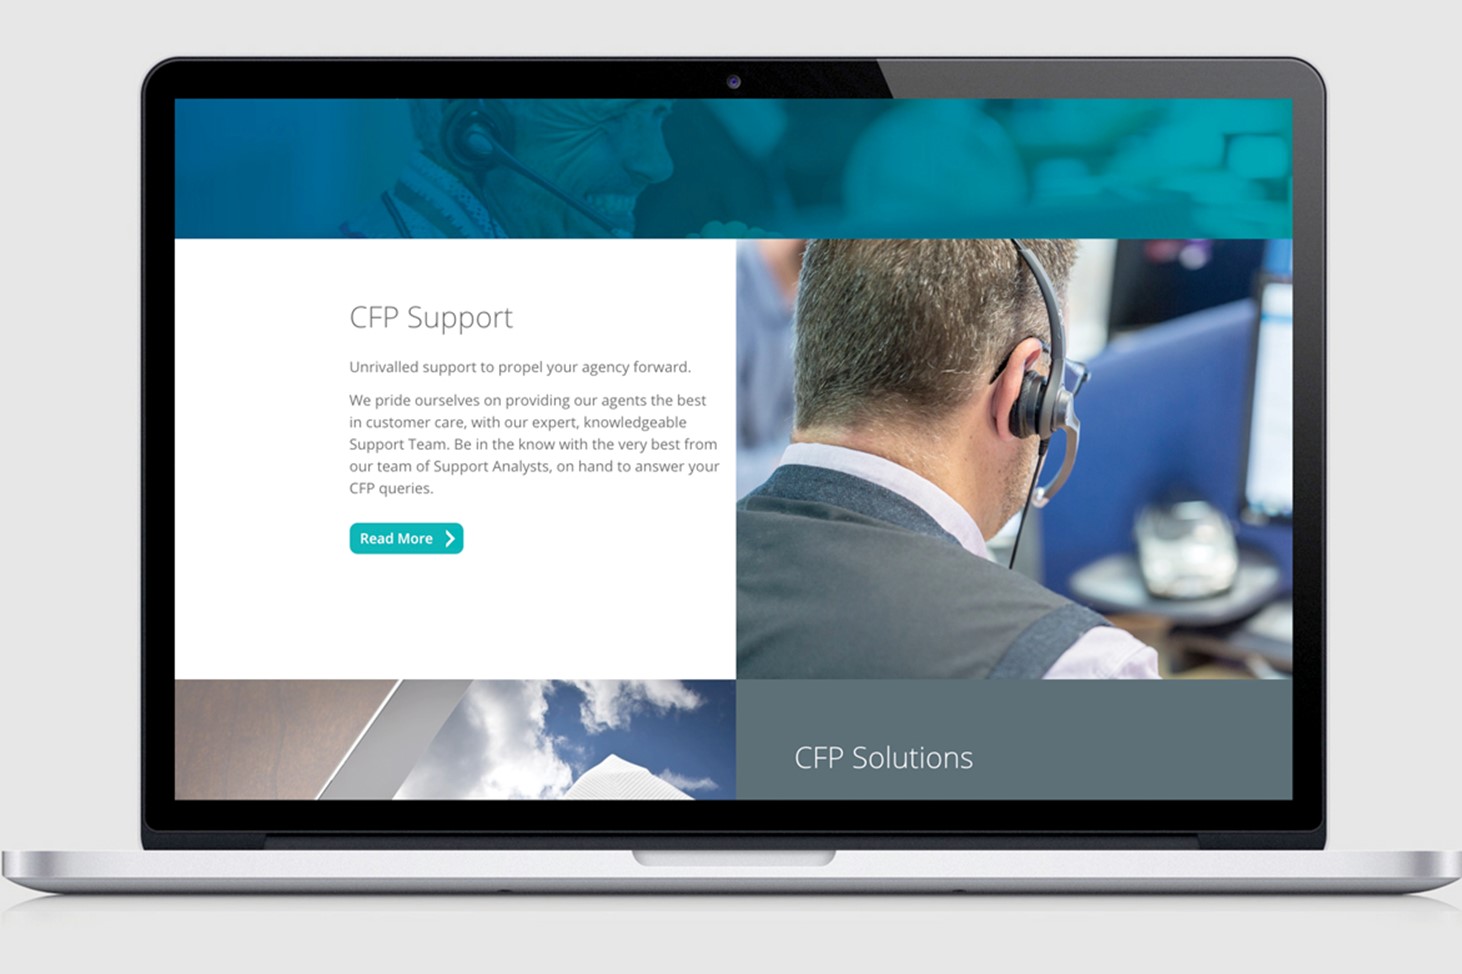 CFP information and a picture of a CFP employee using a phone headset. CFP support